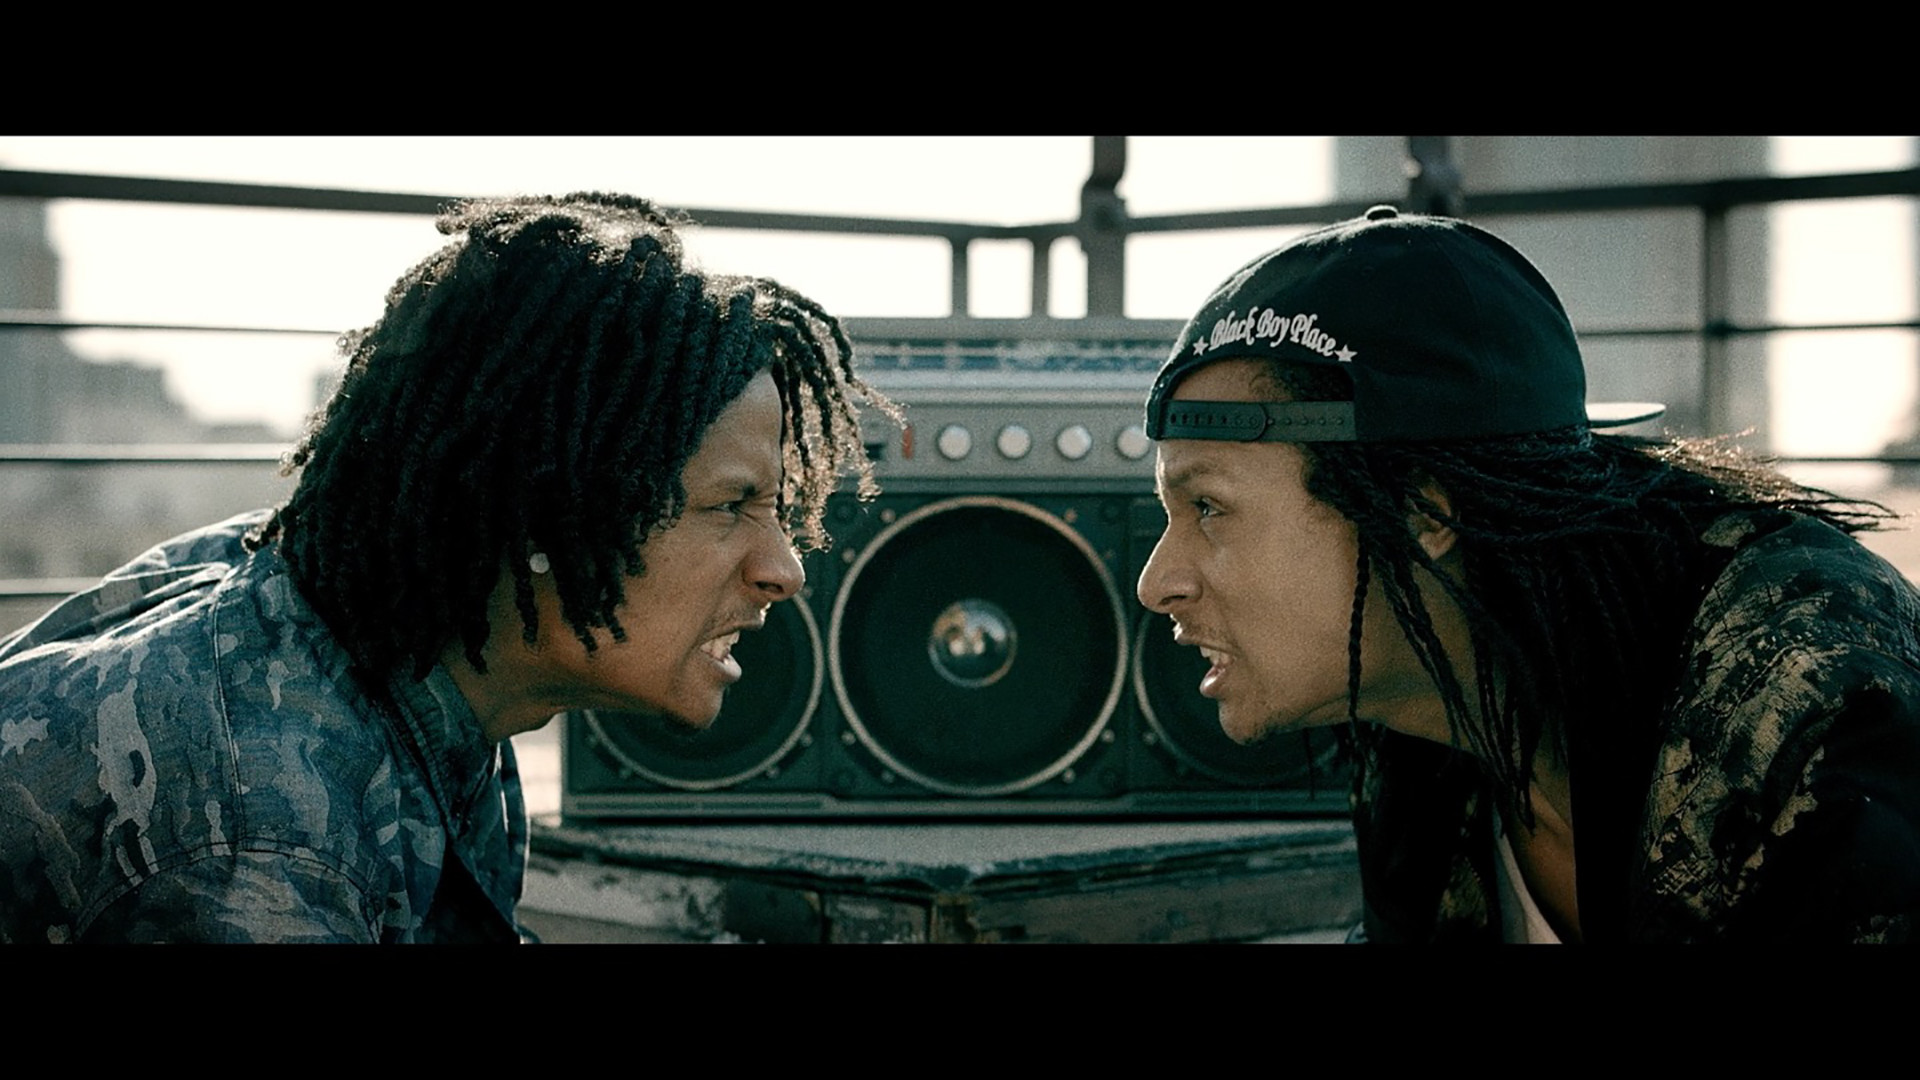 1920x1080 THE HEARTBREAKING TALE OF LARRY AND LAURENT BOURGEOIS ft. Les Twins